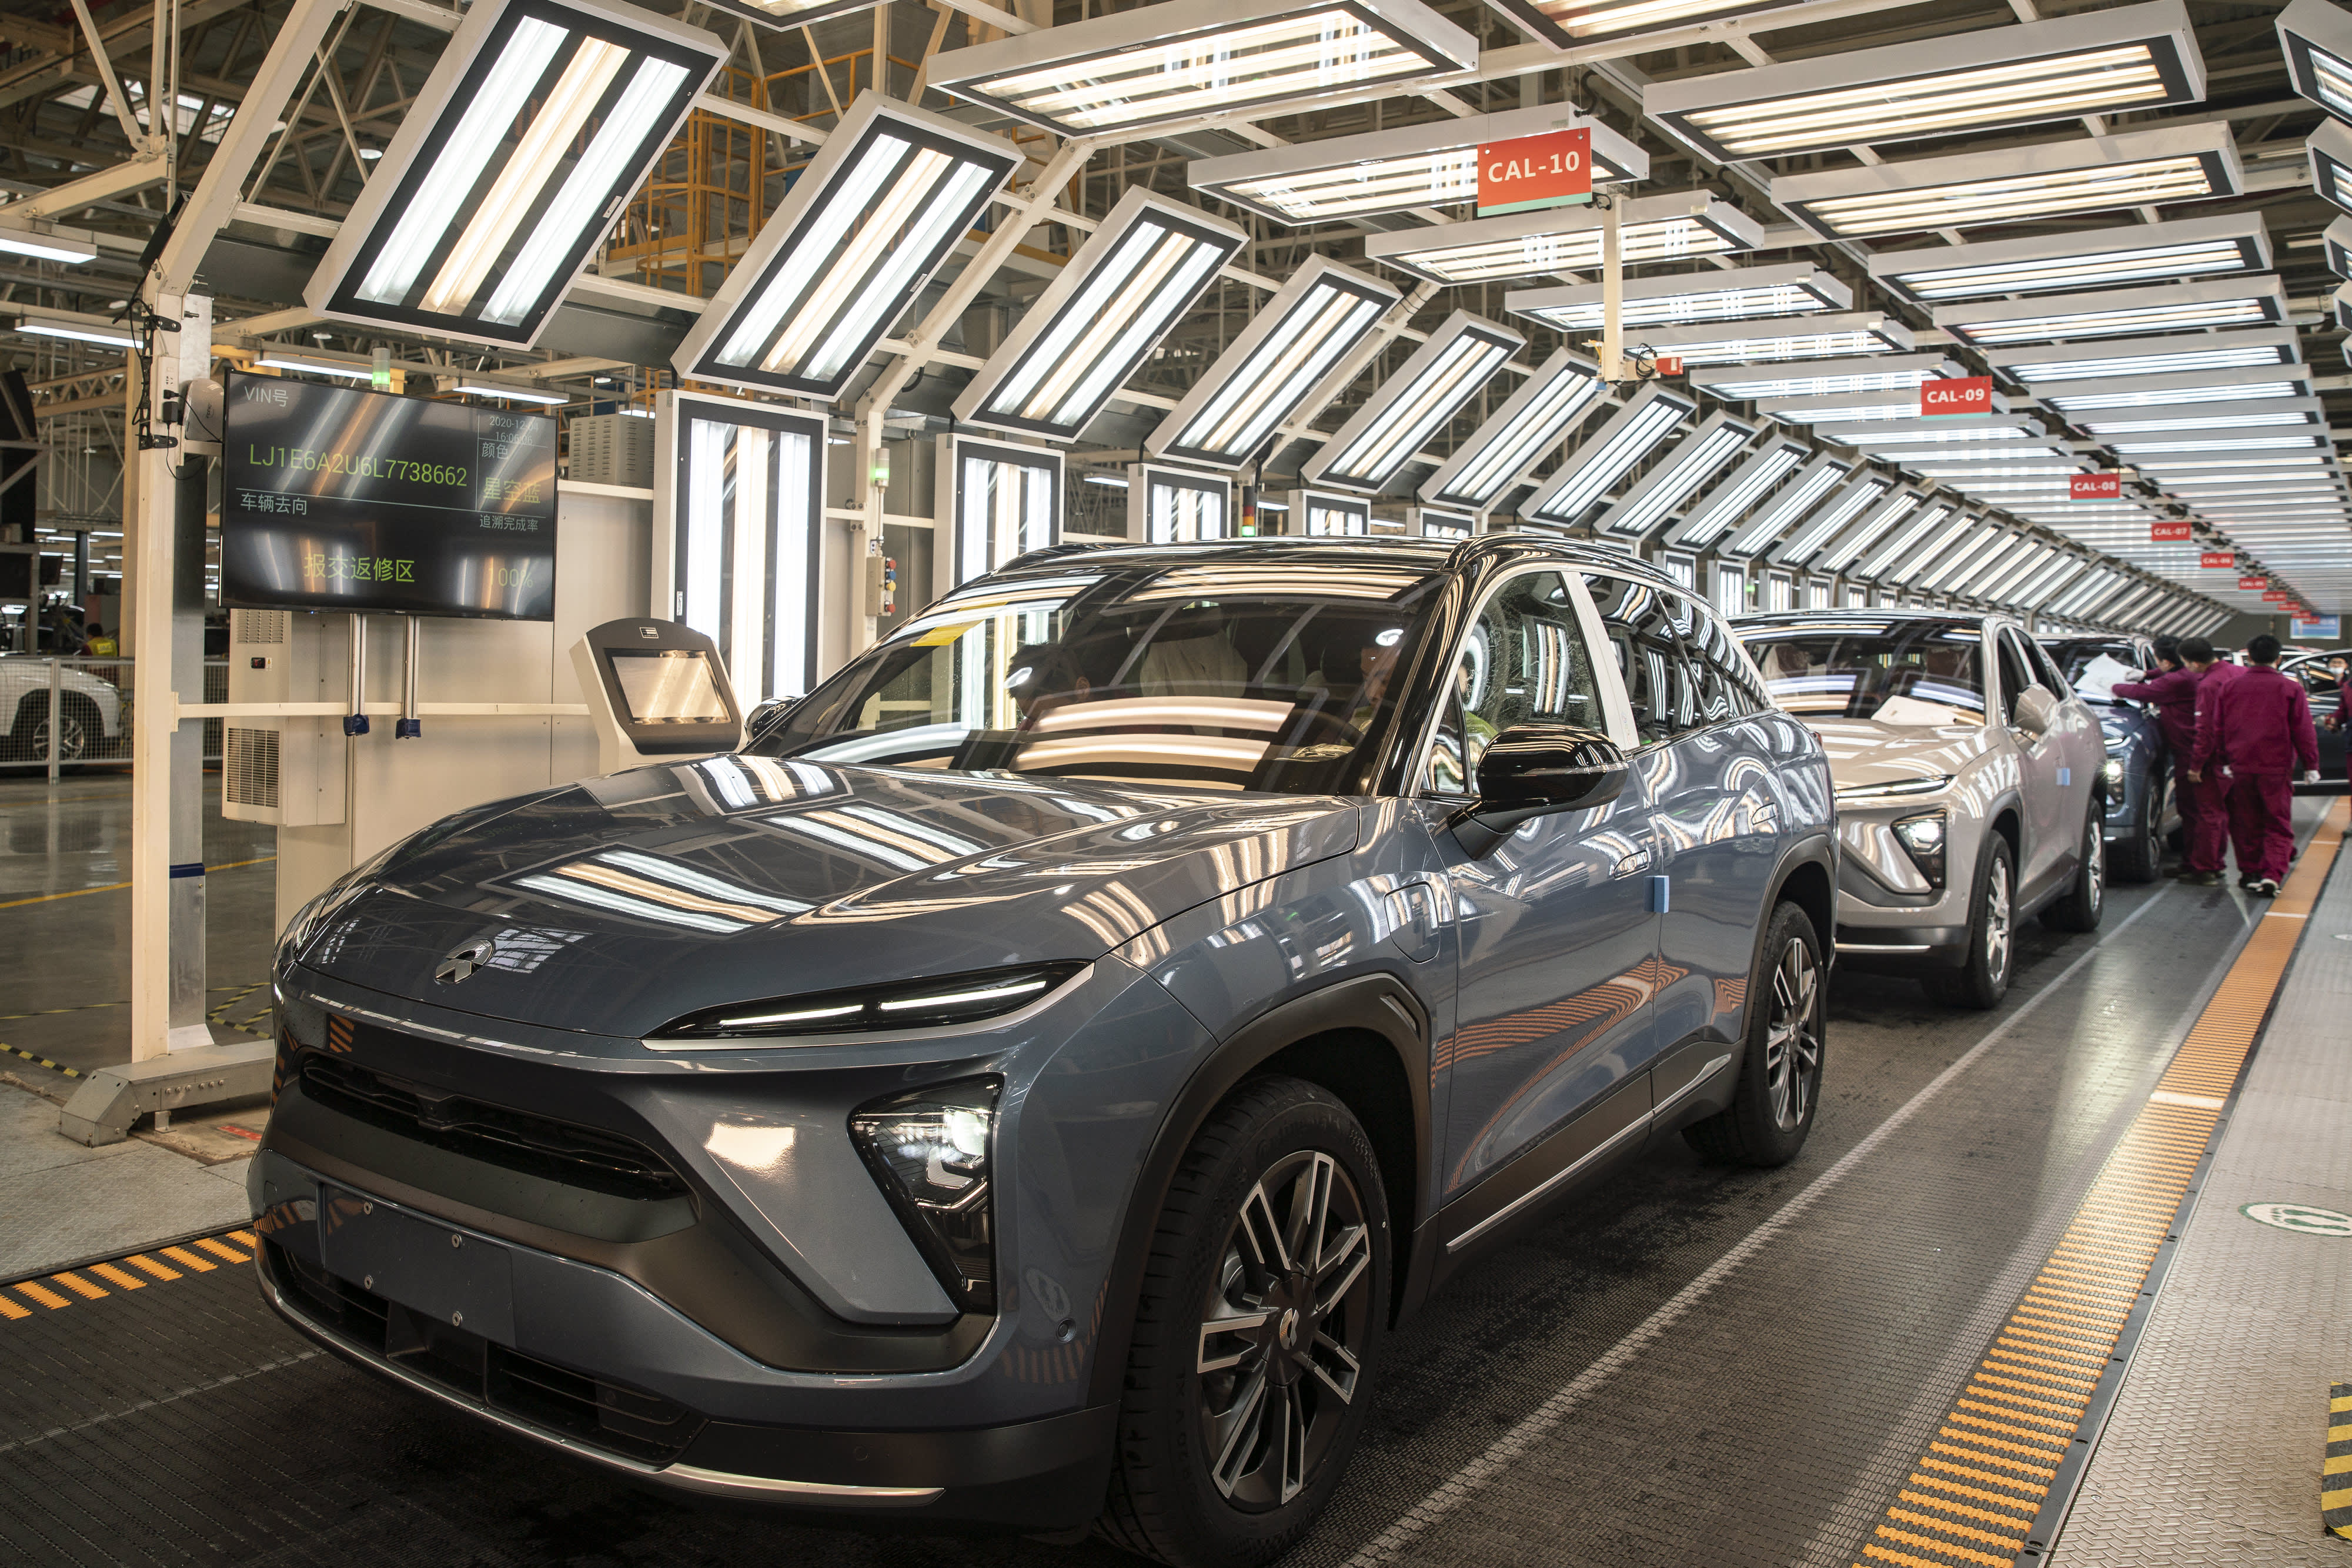 Nio and Tesla fight for dominance in China electric vehicle market